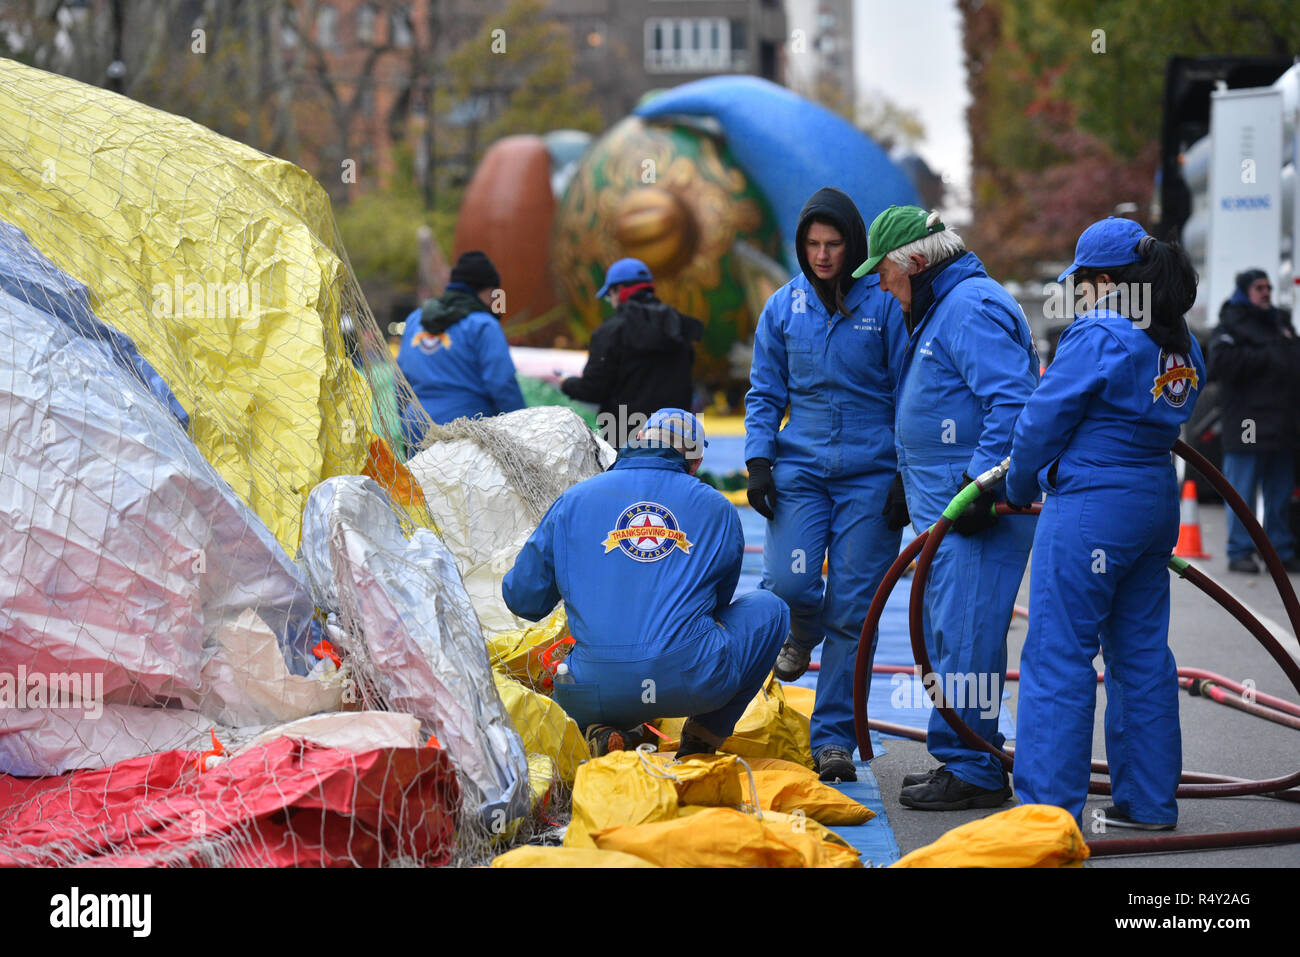 Workers are seen filling parade baloons with helium during the 92nd Annual Macy’s Thanksgiving Day Parade Inflation Eve on November 21, 2018 in New Yo Stock Photo